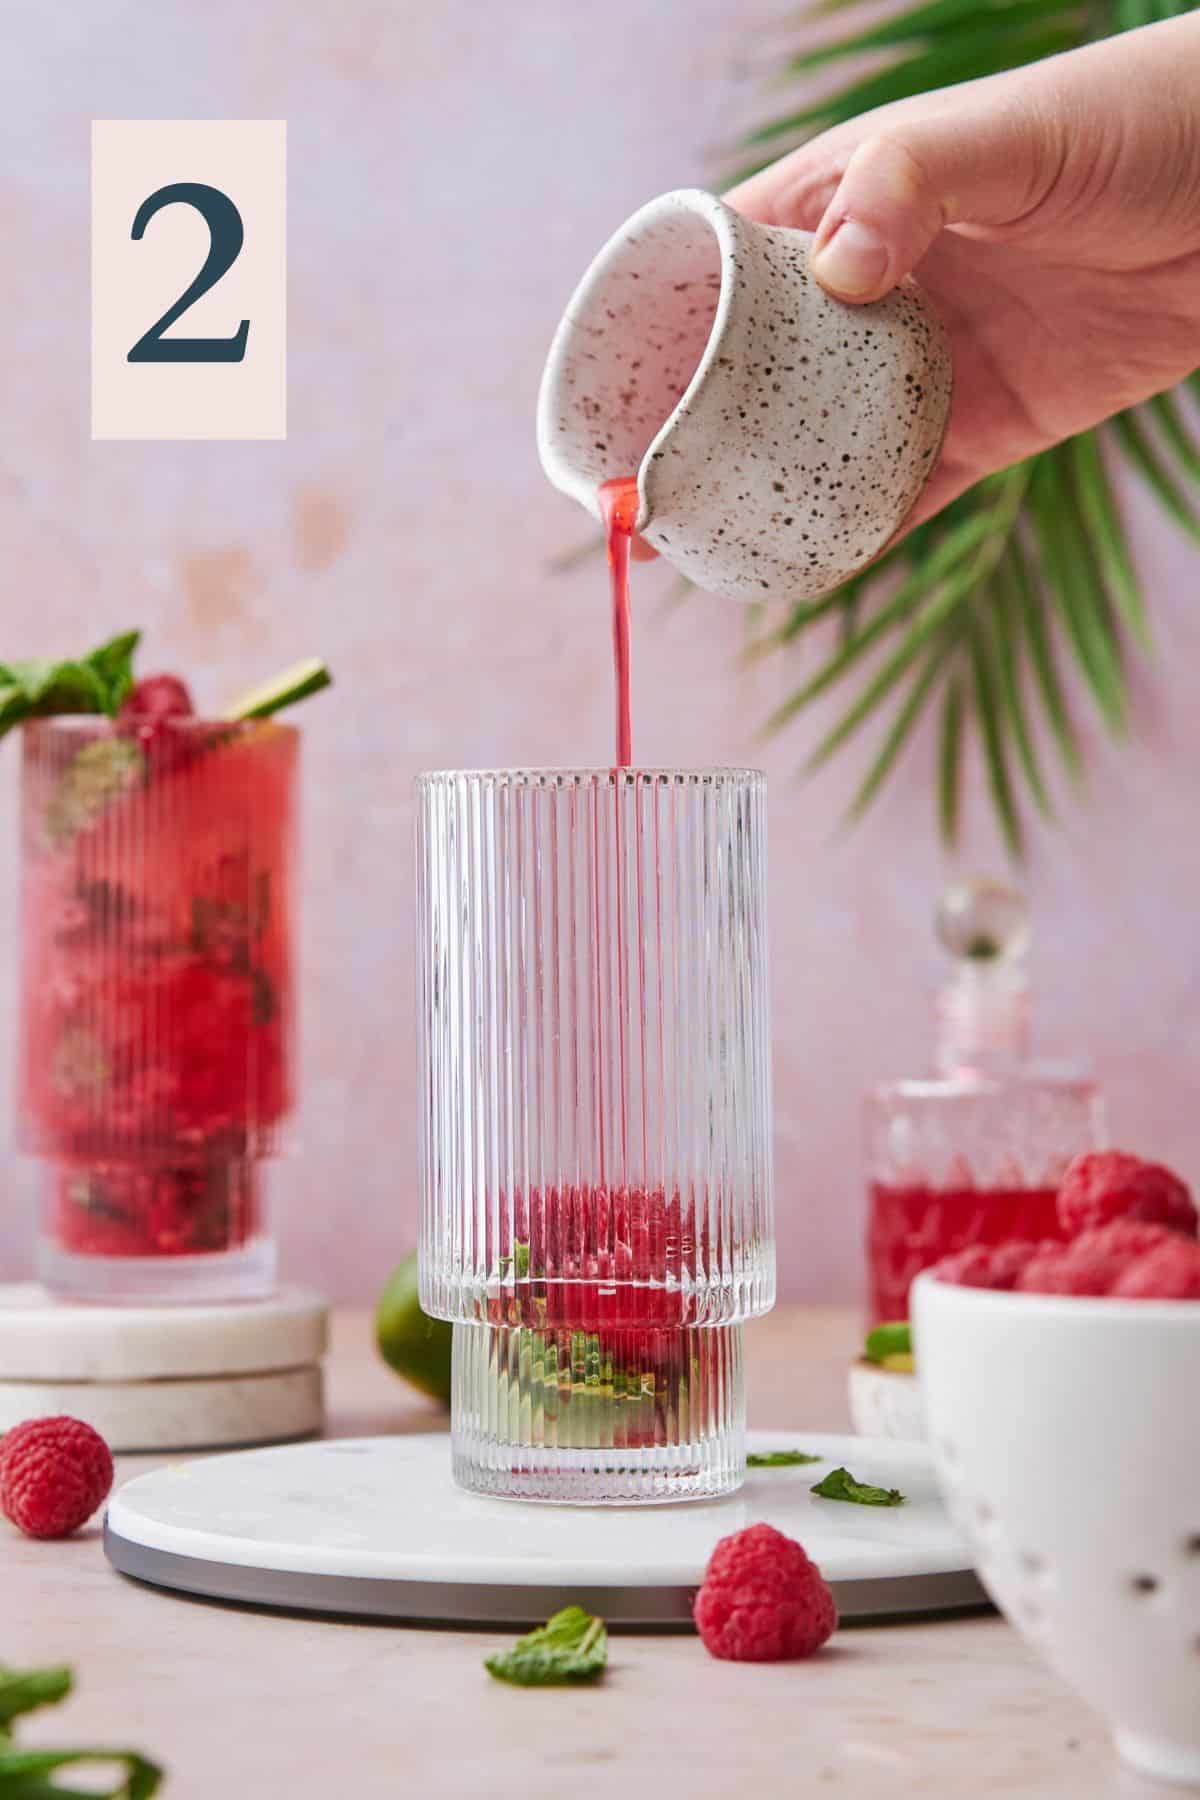 Adding raspberry simple syrup to a glass with mint and raspberry.